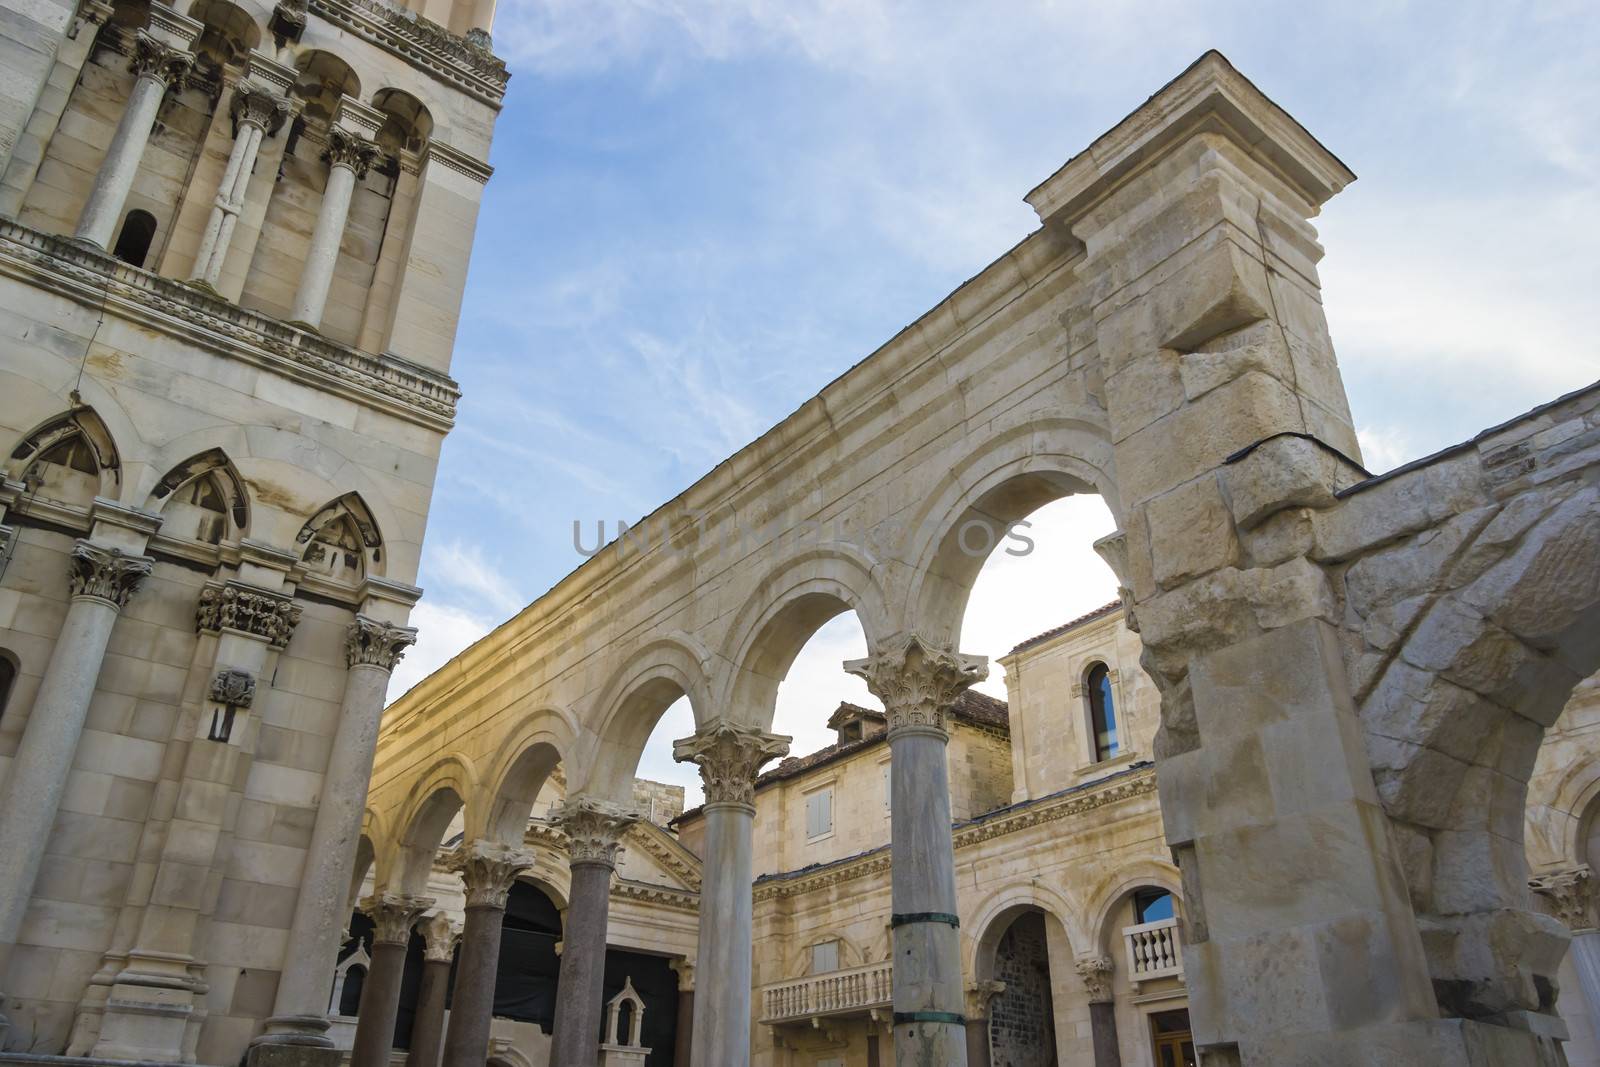 Diocletian palace ruins and cathedral bell tower, Split, Croatia by Tetyana